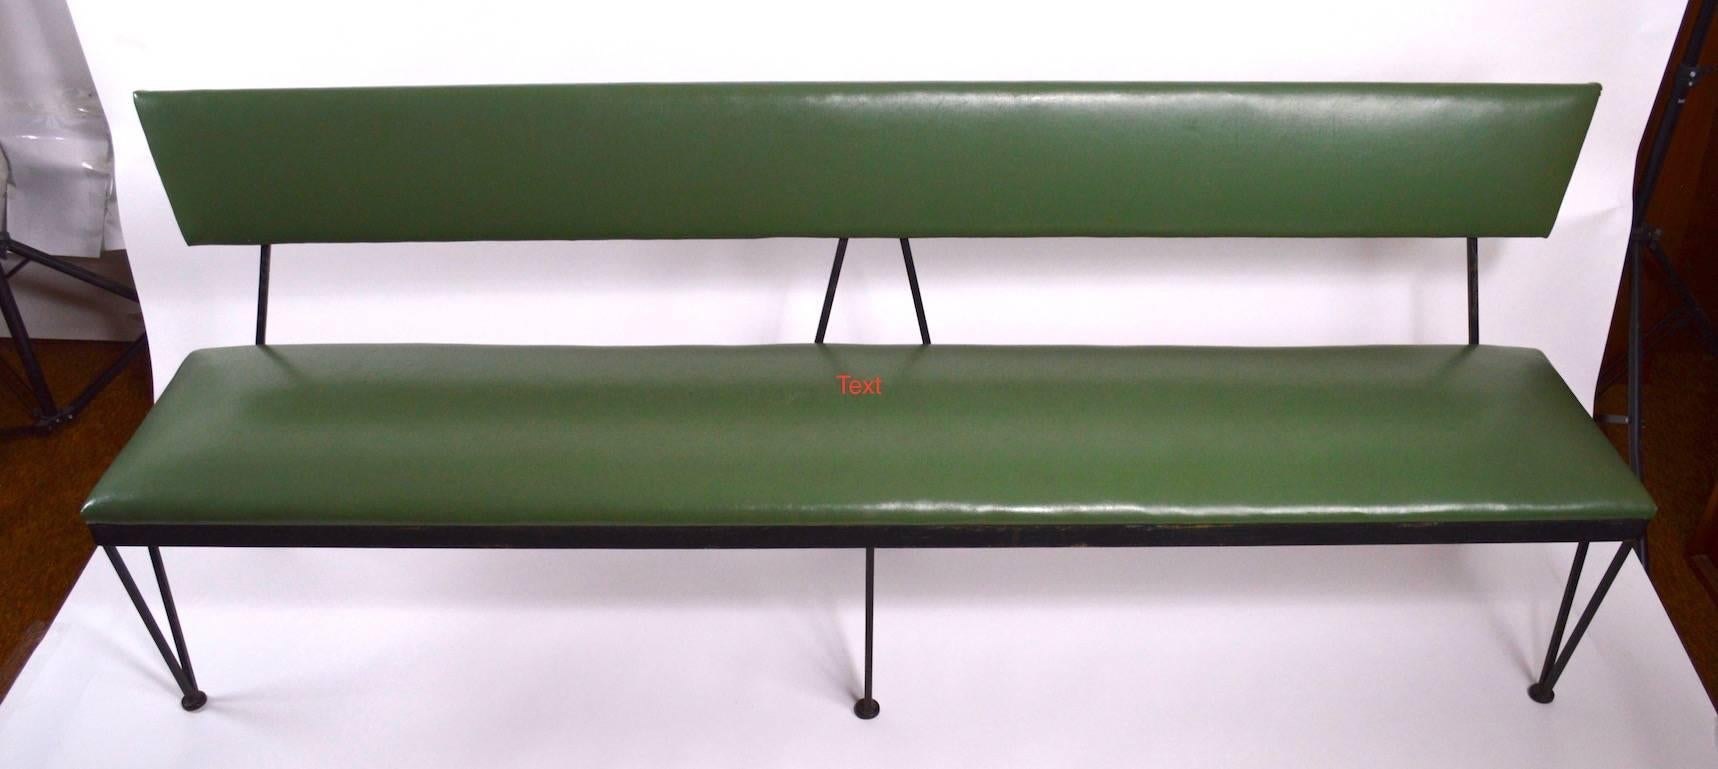 Extra long wrought iron and vinyl bench, clean, original and ready to use.
 Design after Umanoff or Weinberg, well constructed, heavy and solid.
 Please view the matching, but shorter bench we have listed.